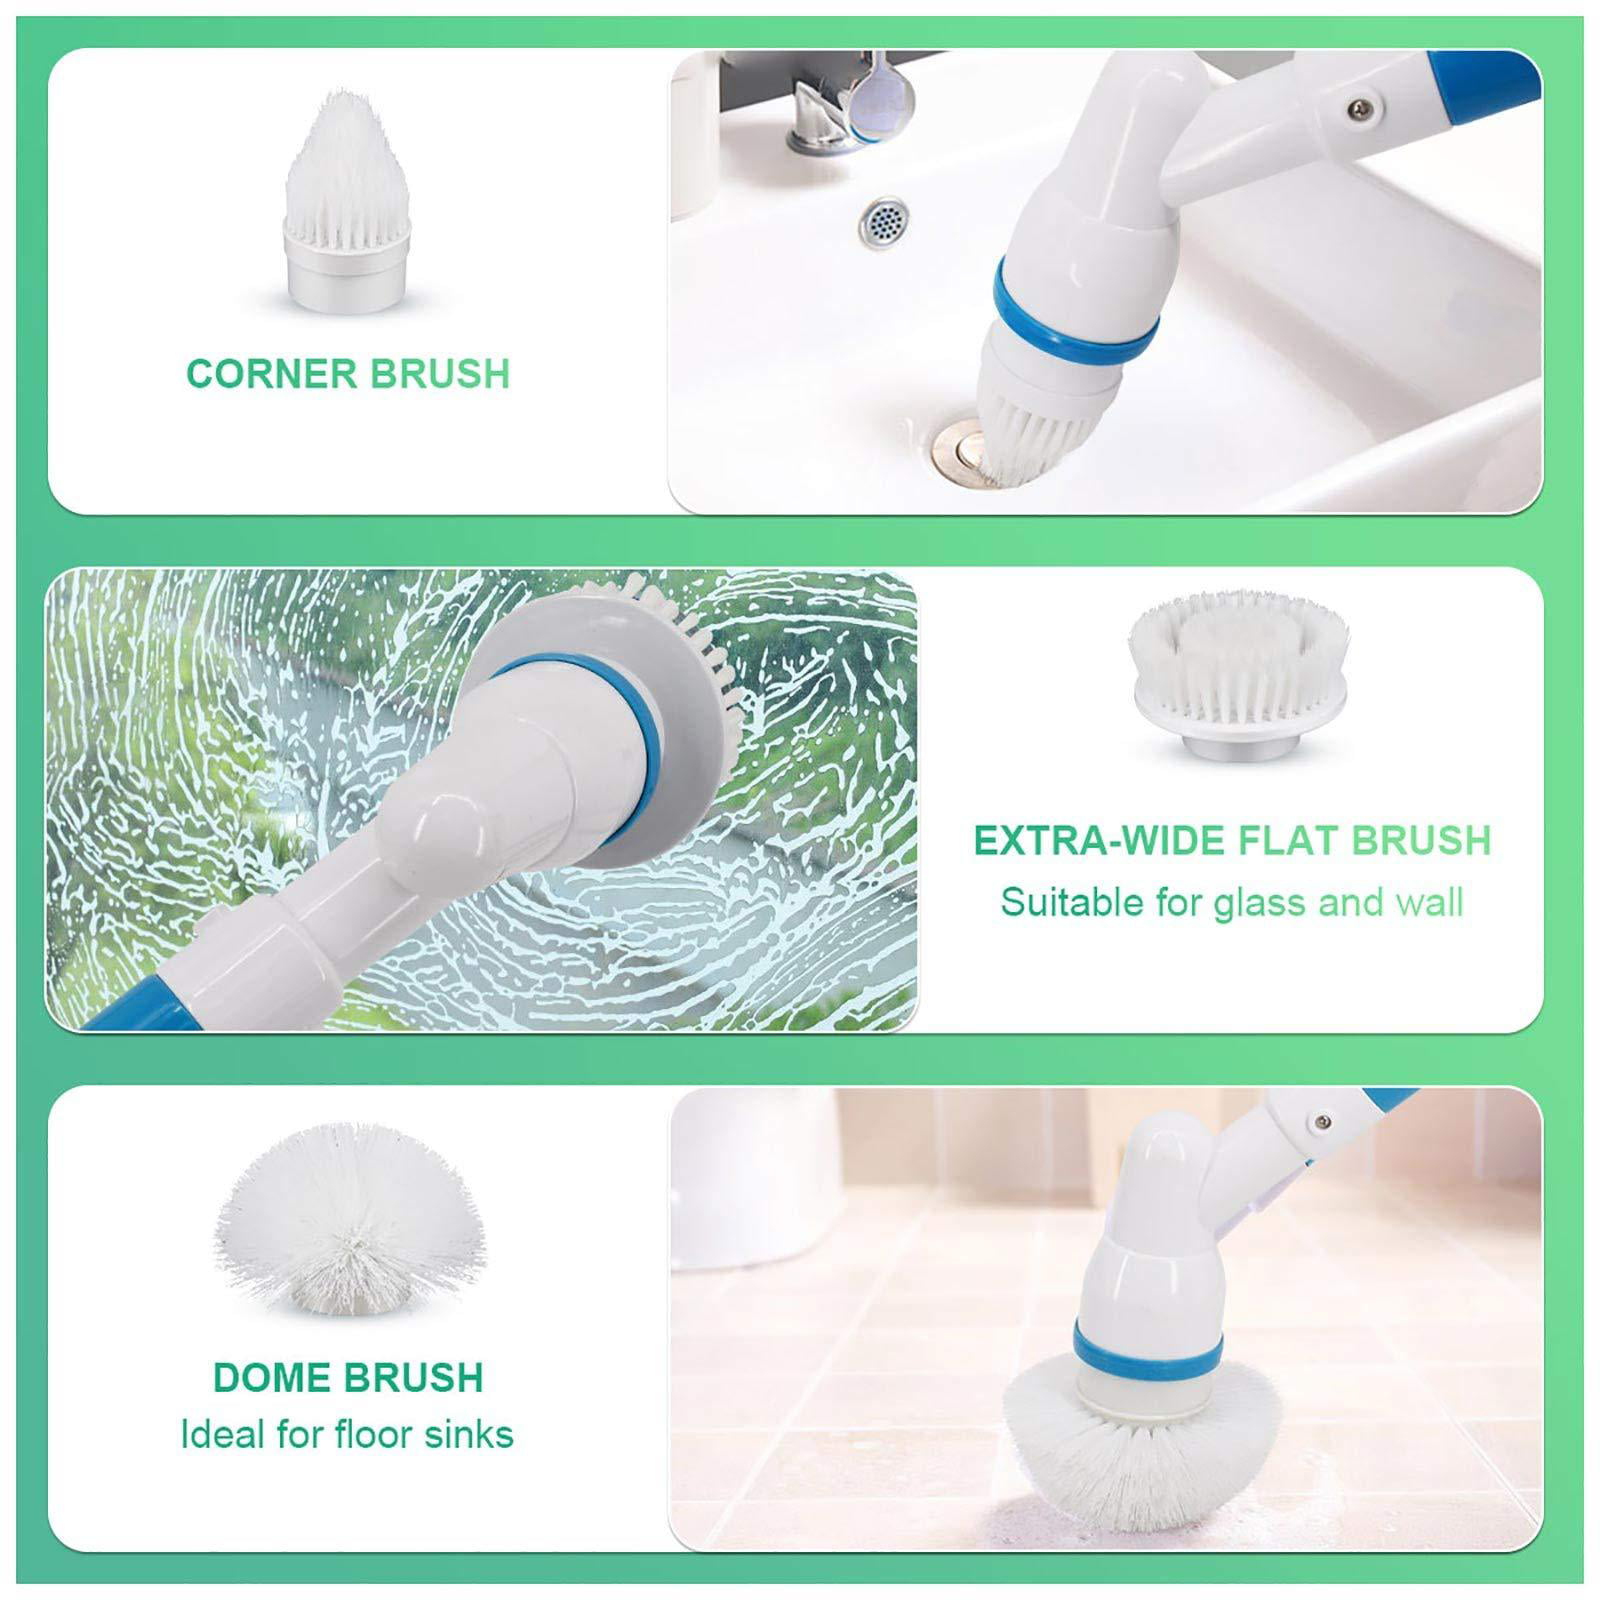 We Tried the Cordless Electric Spin Scrubber, Cordless and so convenient!  Your arms and back will thank you later! 🧼🫧 Get yours:   By Taste of Home